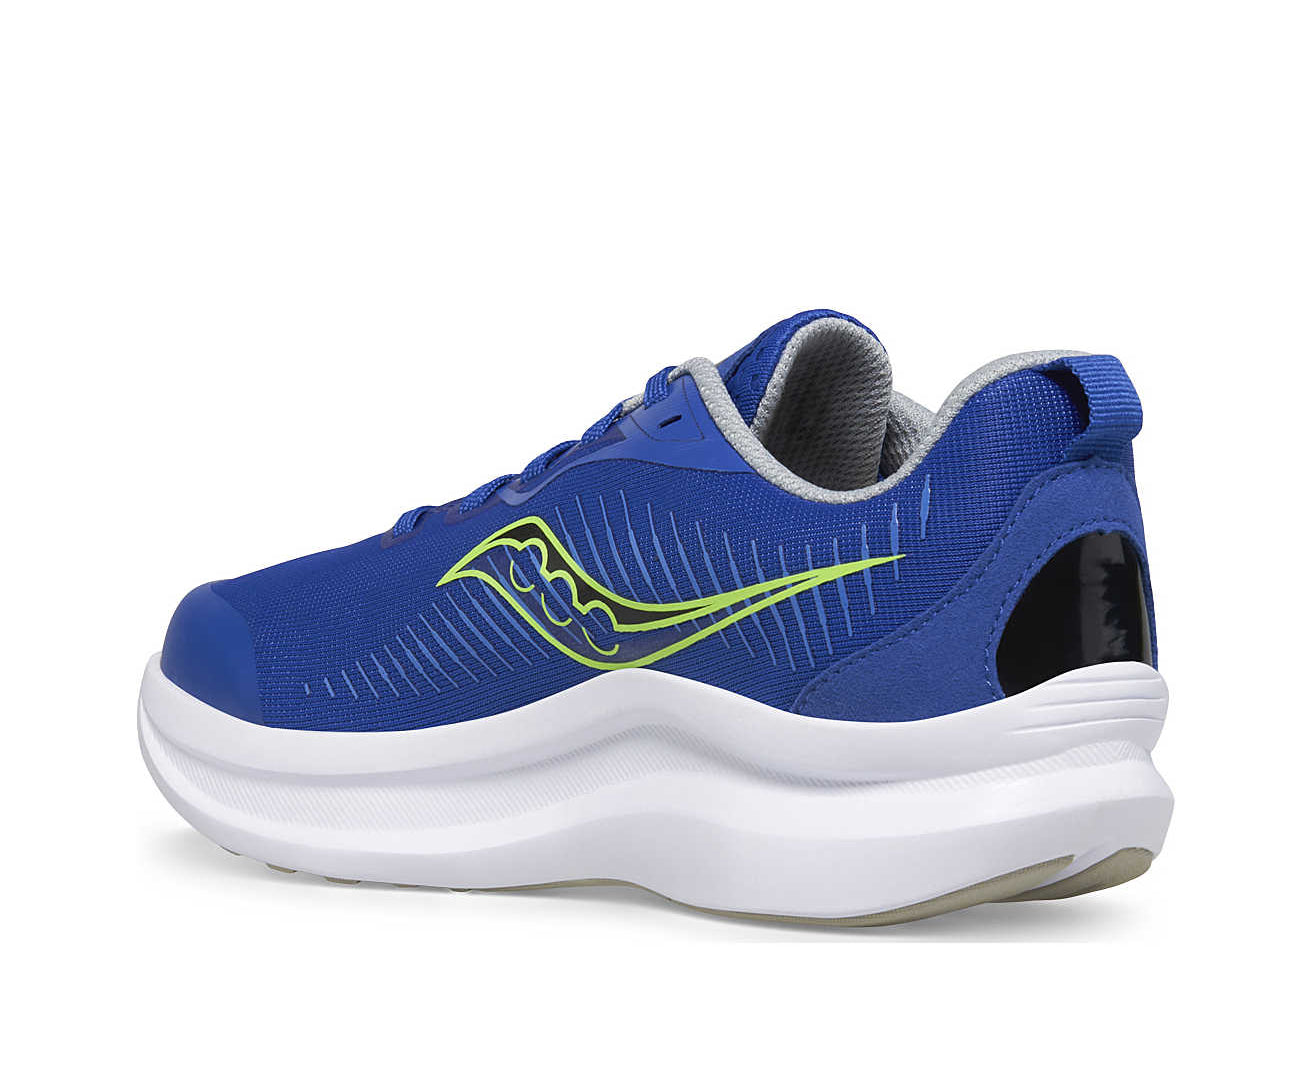 A blue mesh low-cut sneaker with green accents.